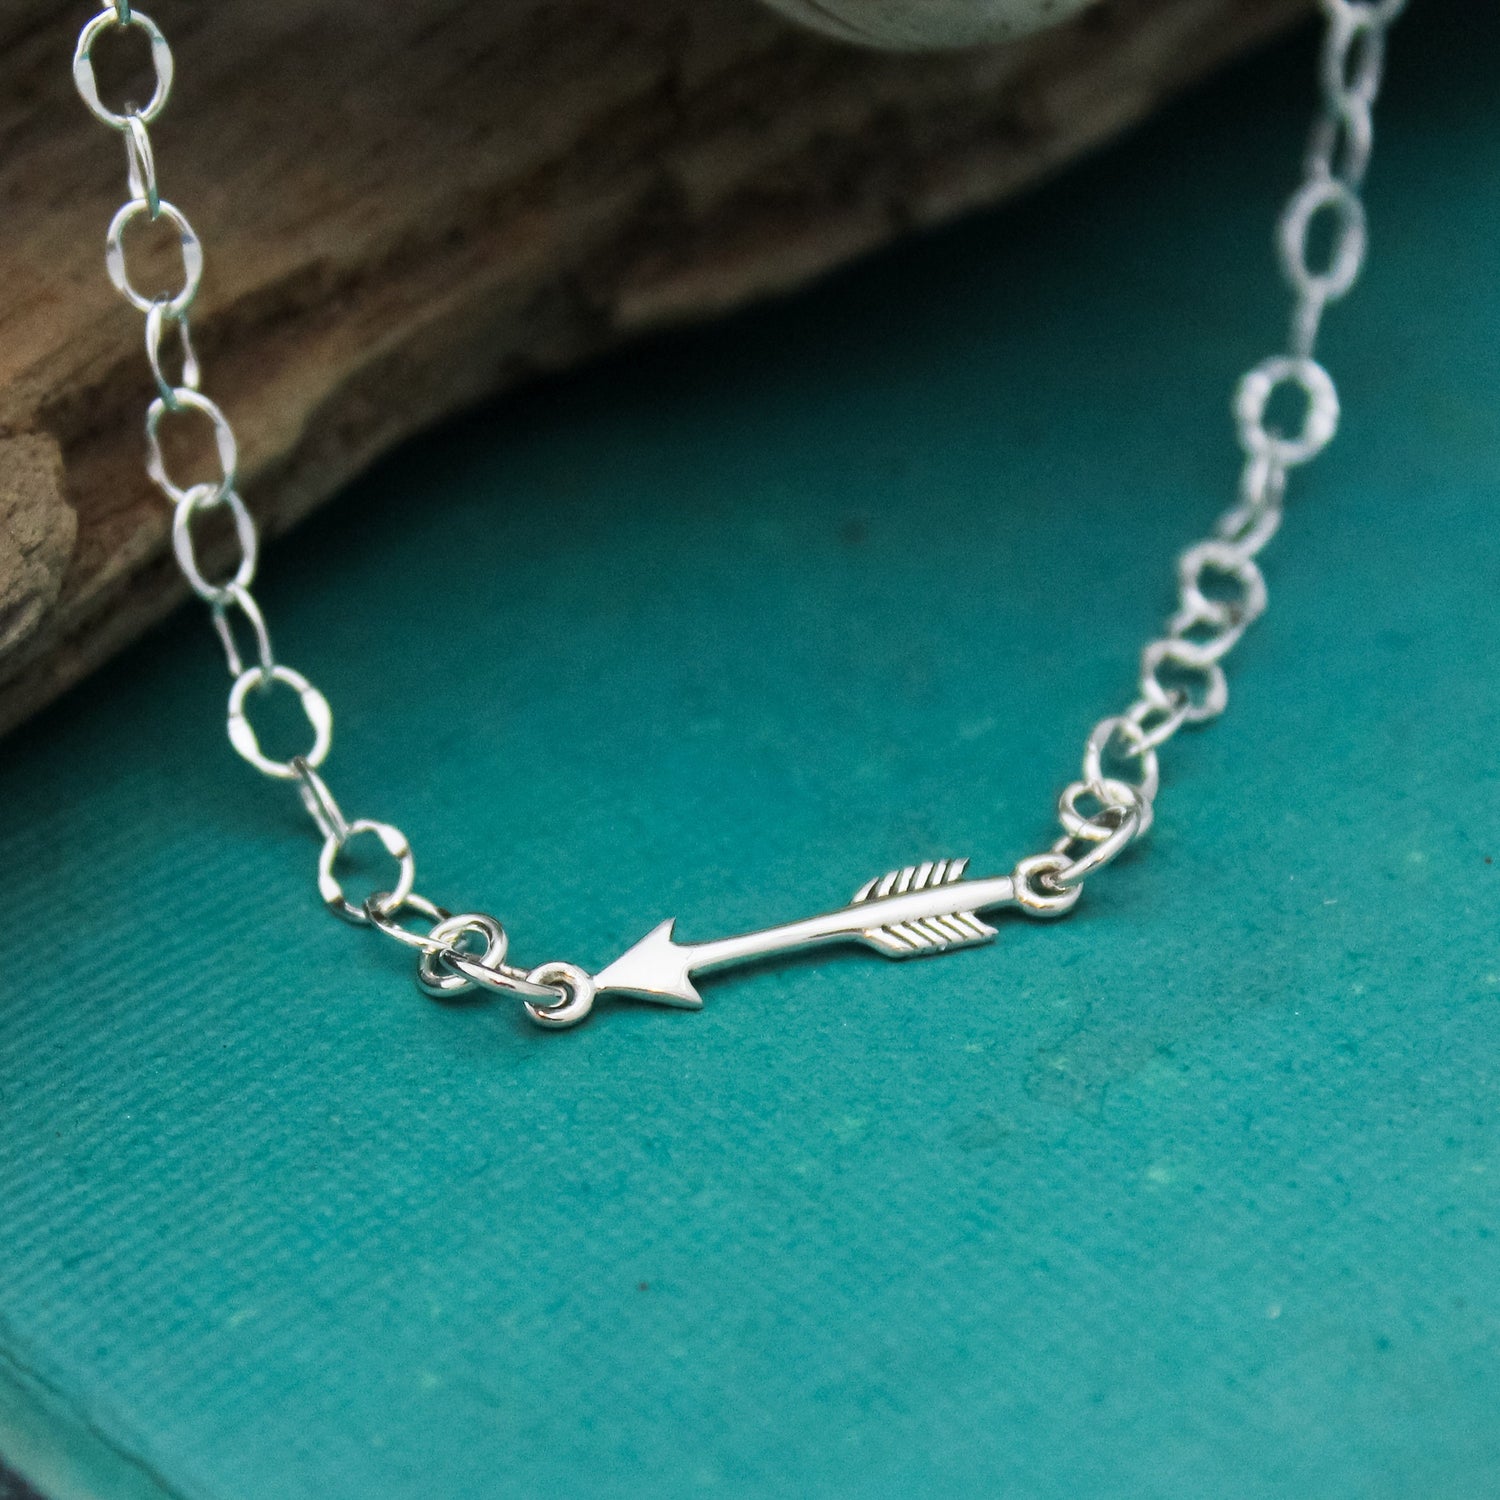 Arrow Anklet, Follow Your Arrow Anklet, Birthday Gift, Arrow Jewelry, Sterling Silver Anklet, Gifts for Her, Summer Cruise Jewelry